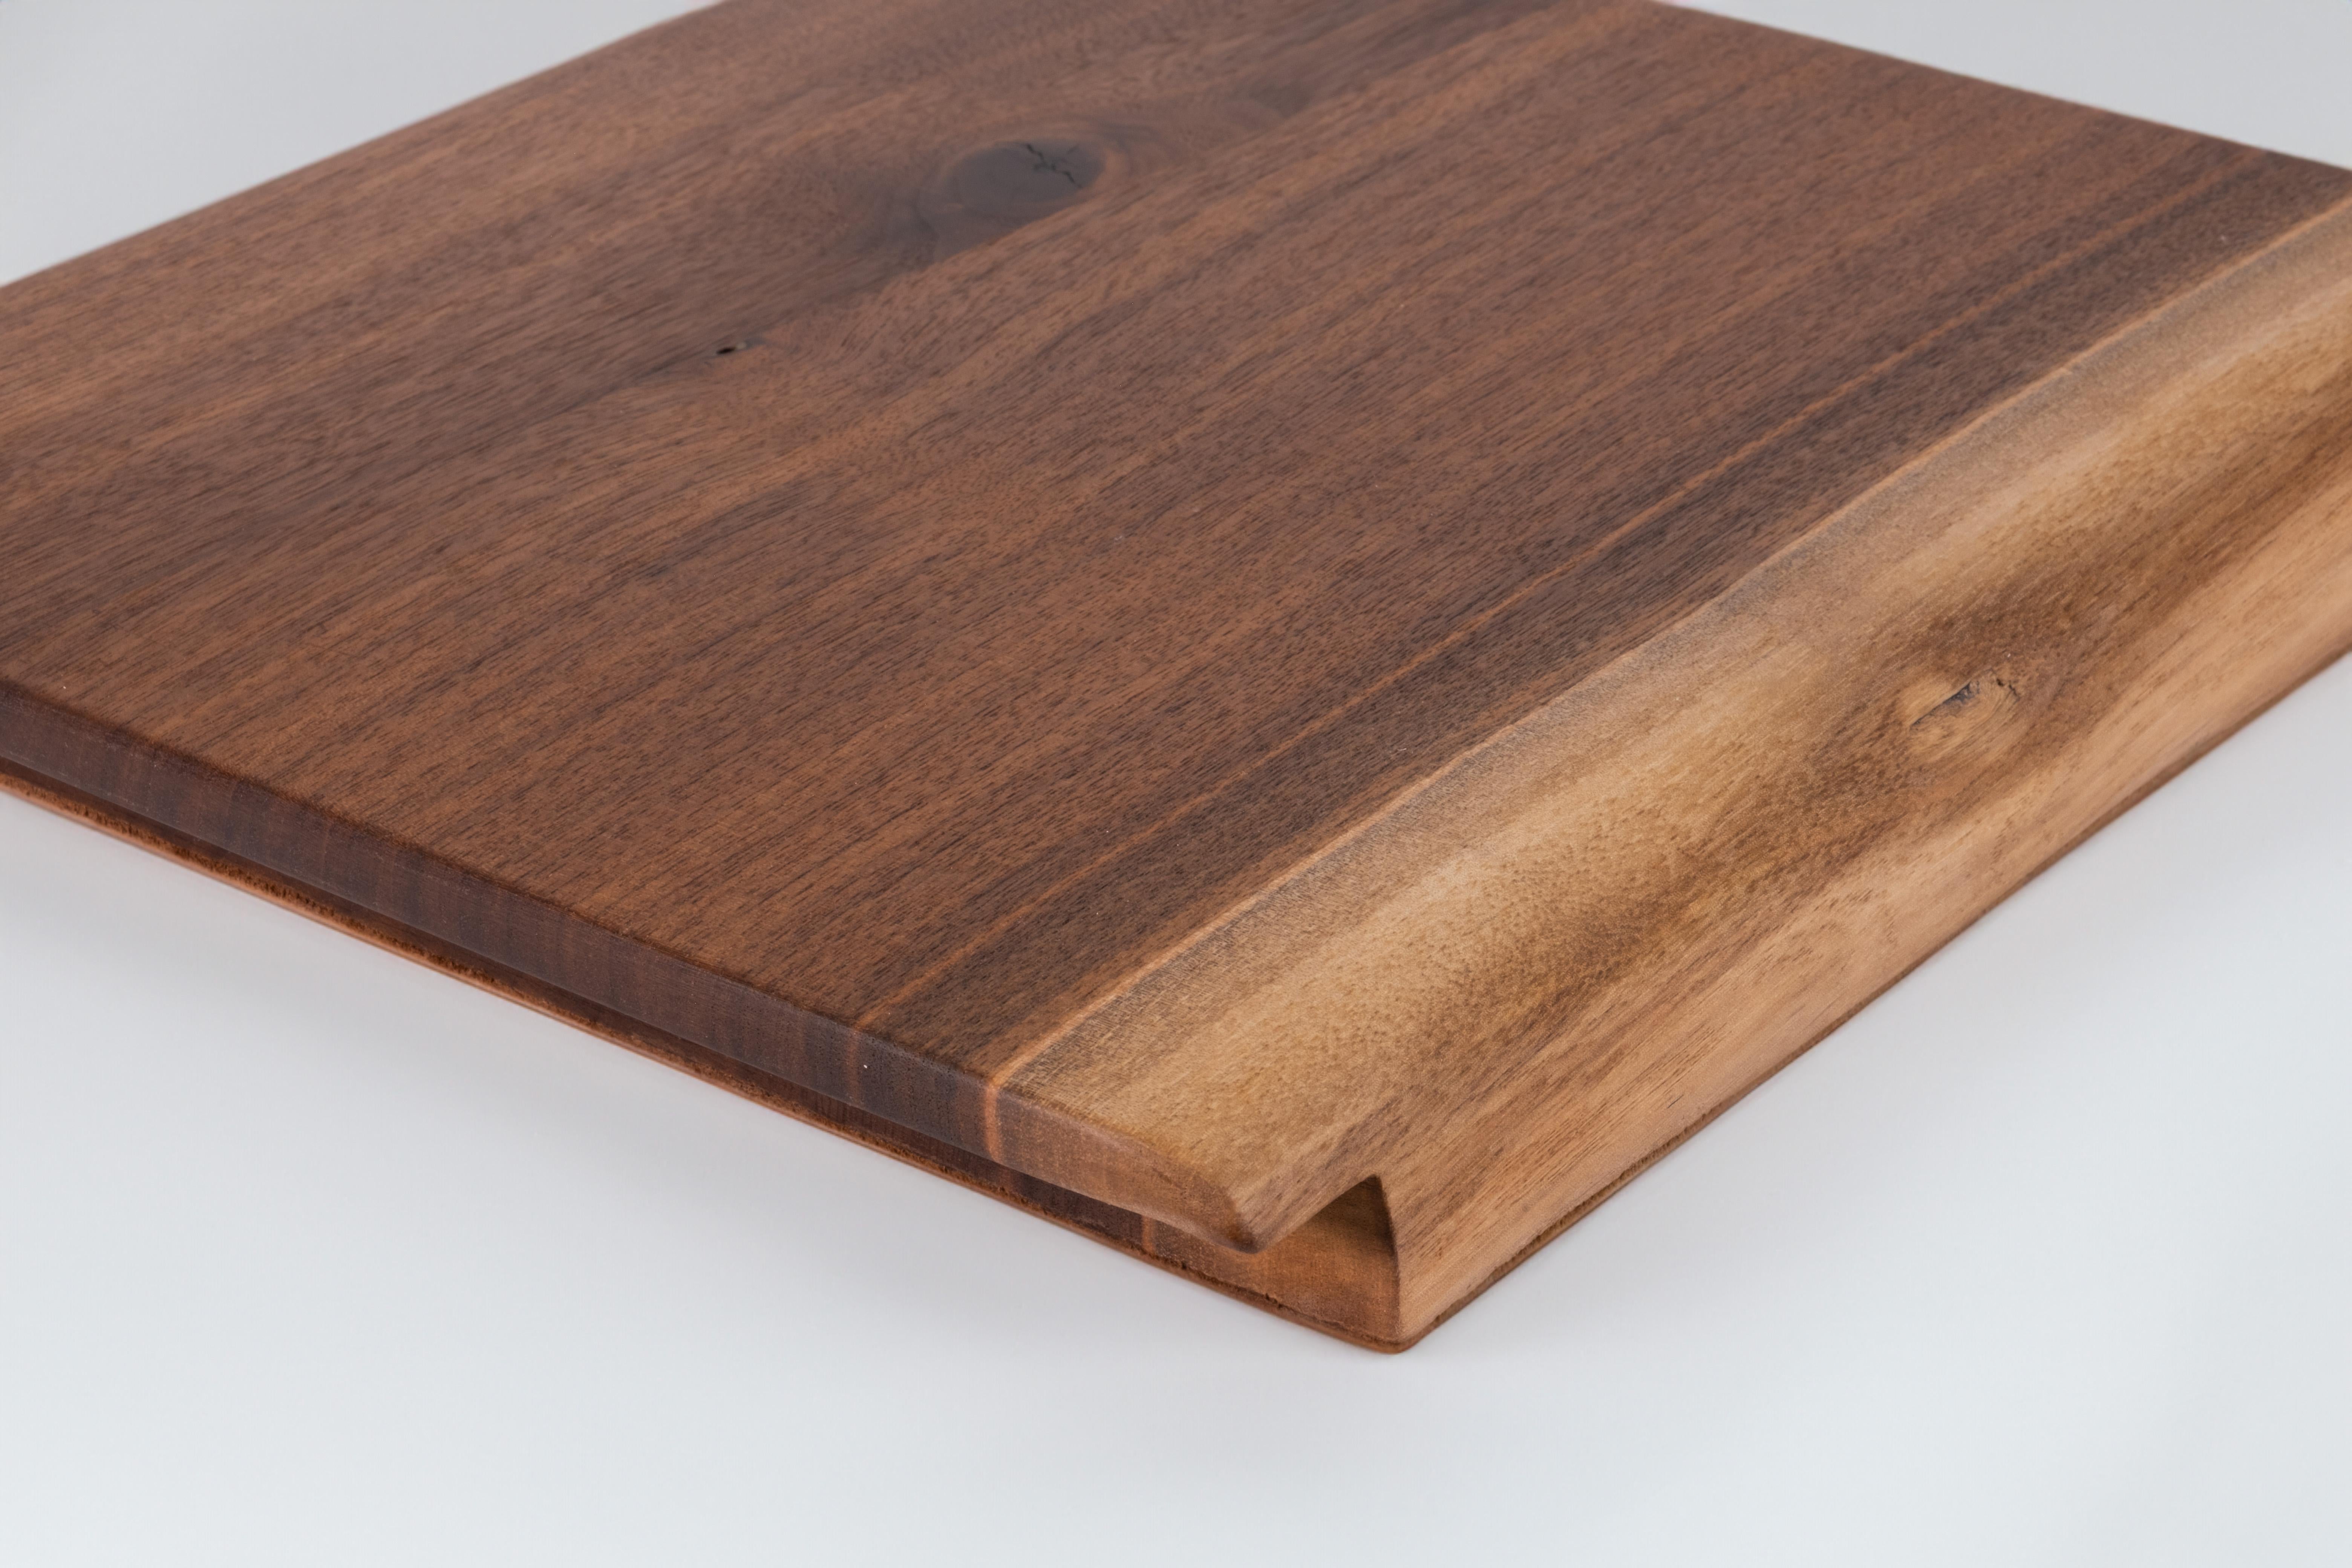 This stunning piece features a unique design where one edge showcases the captivating live edge of the walnut wood, celebrating its natural beauty. The bottom of the tray is elegantly covered in leather, adding a touch of luxury and ensuring a soft